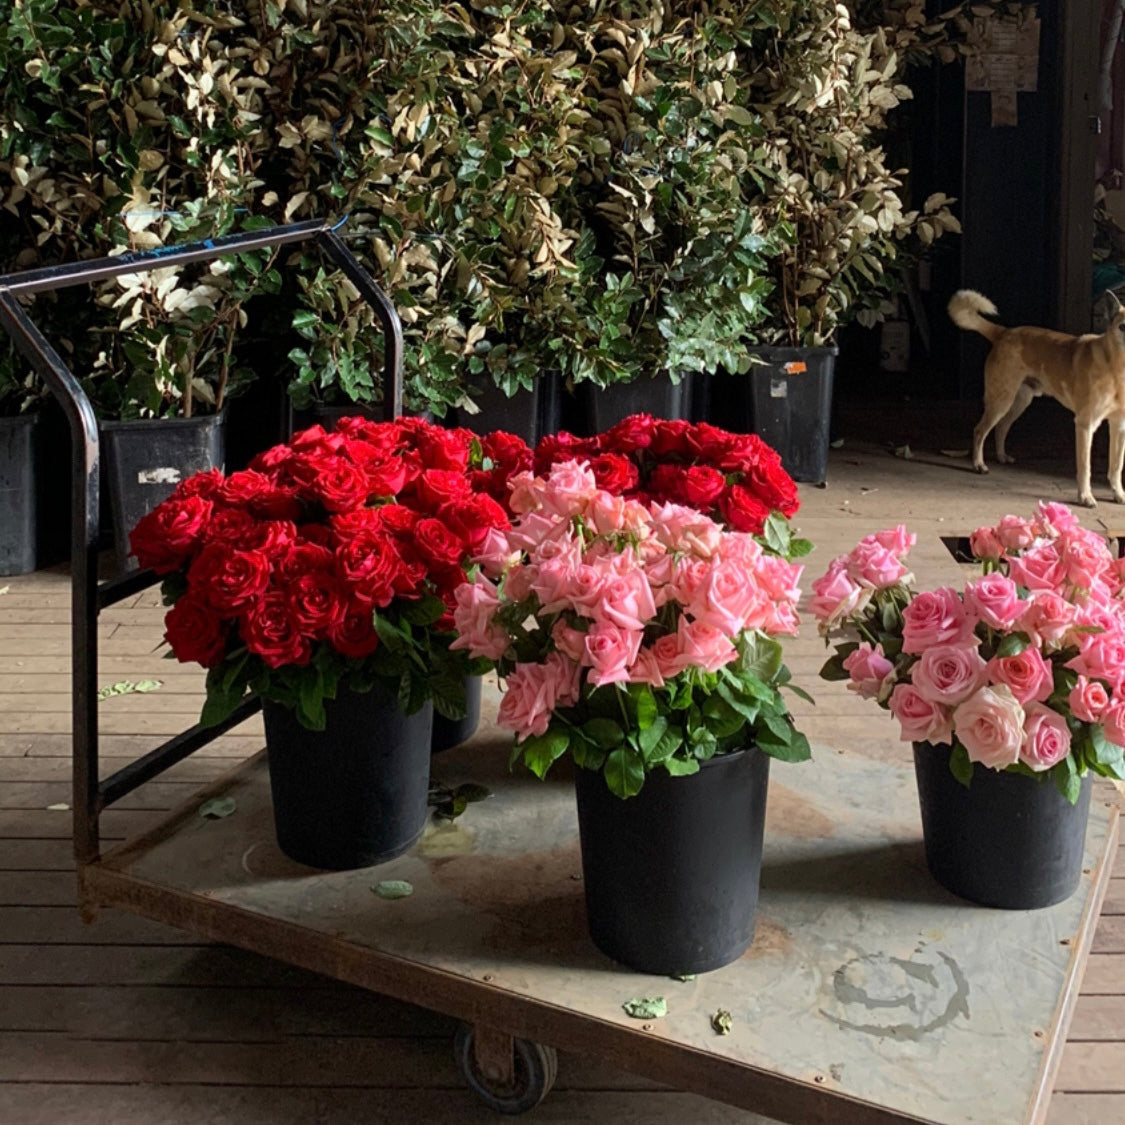 Choosing the right florist this Valentine's Day